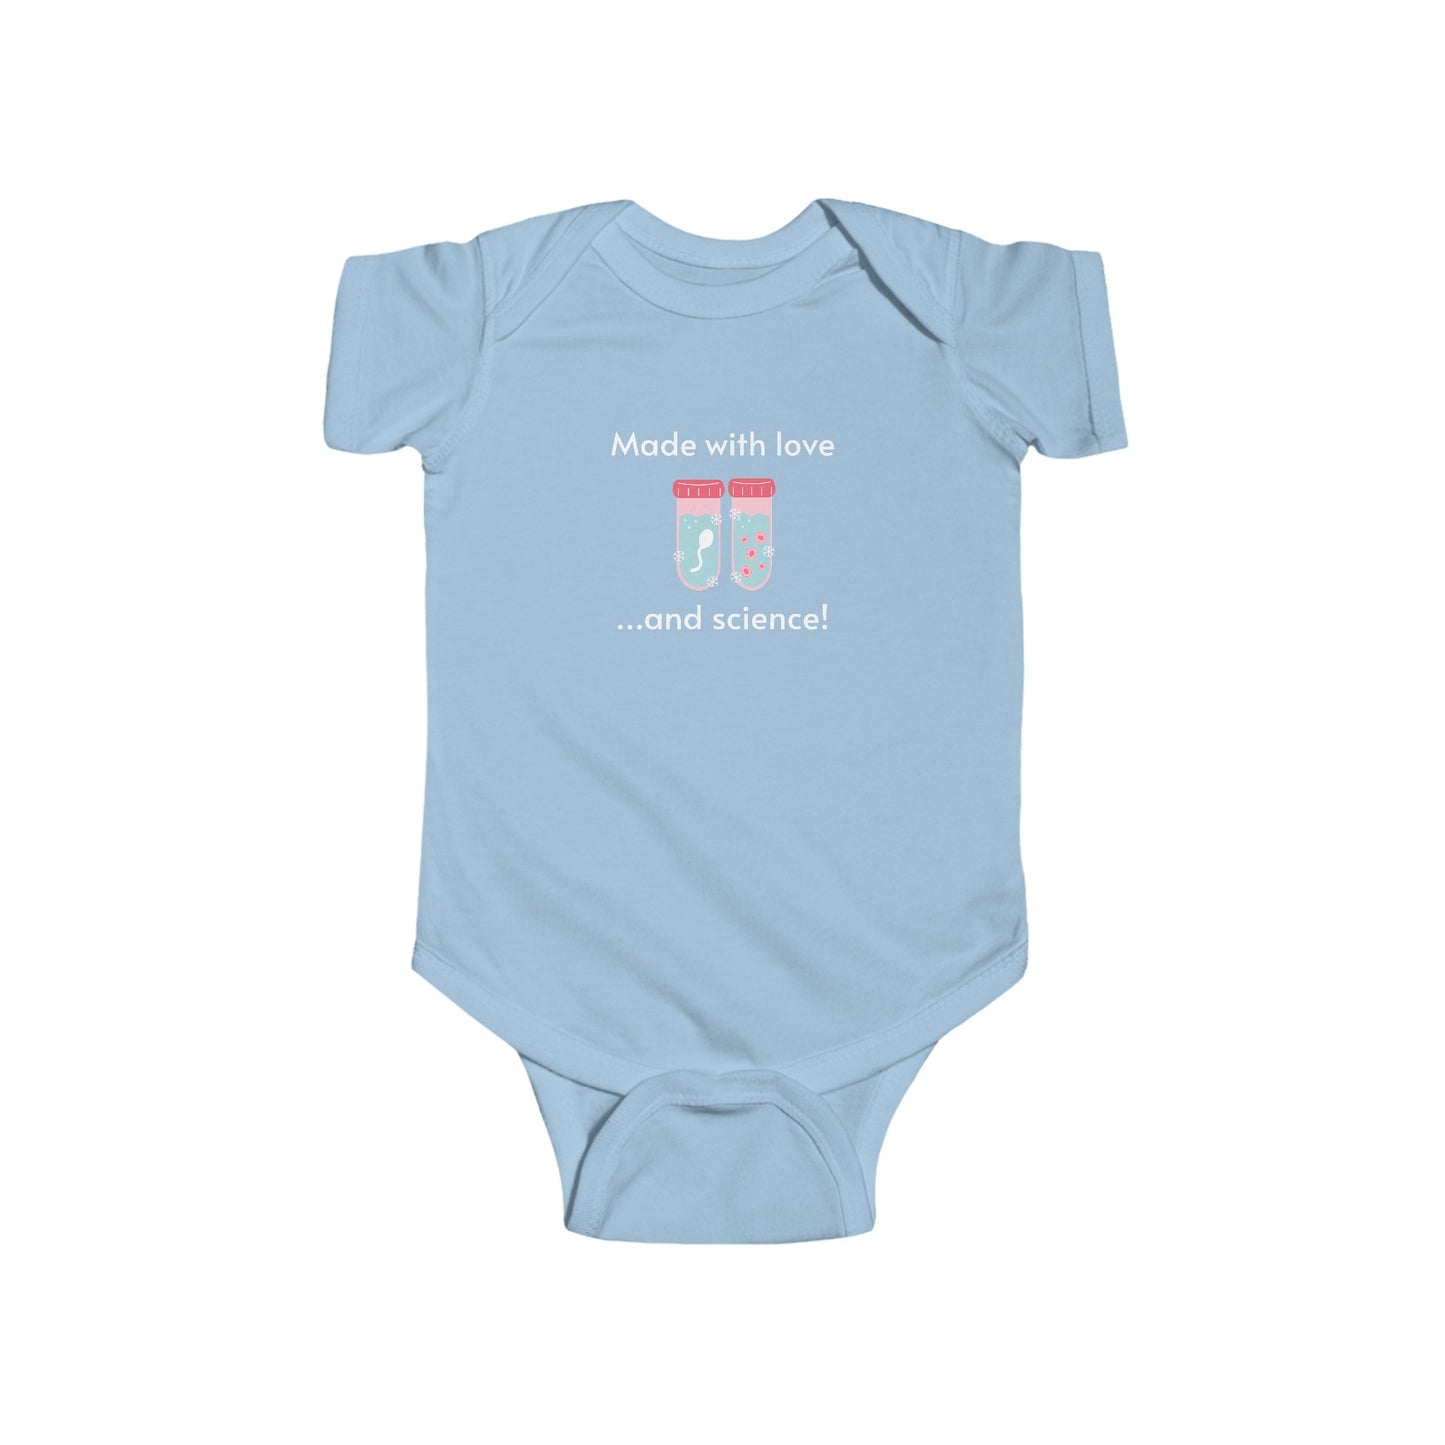 Made with love, and science! Baby Bodysuit